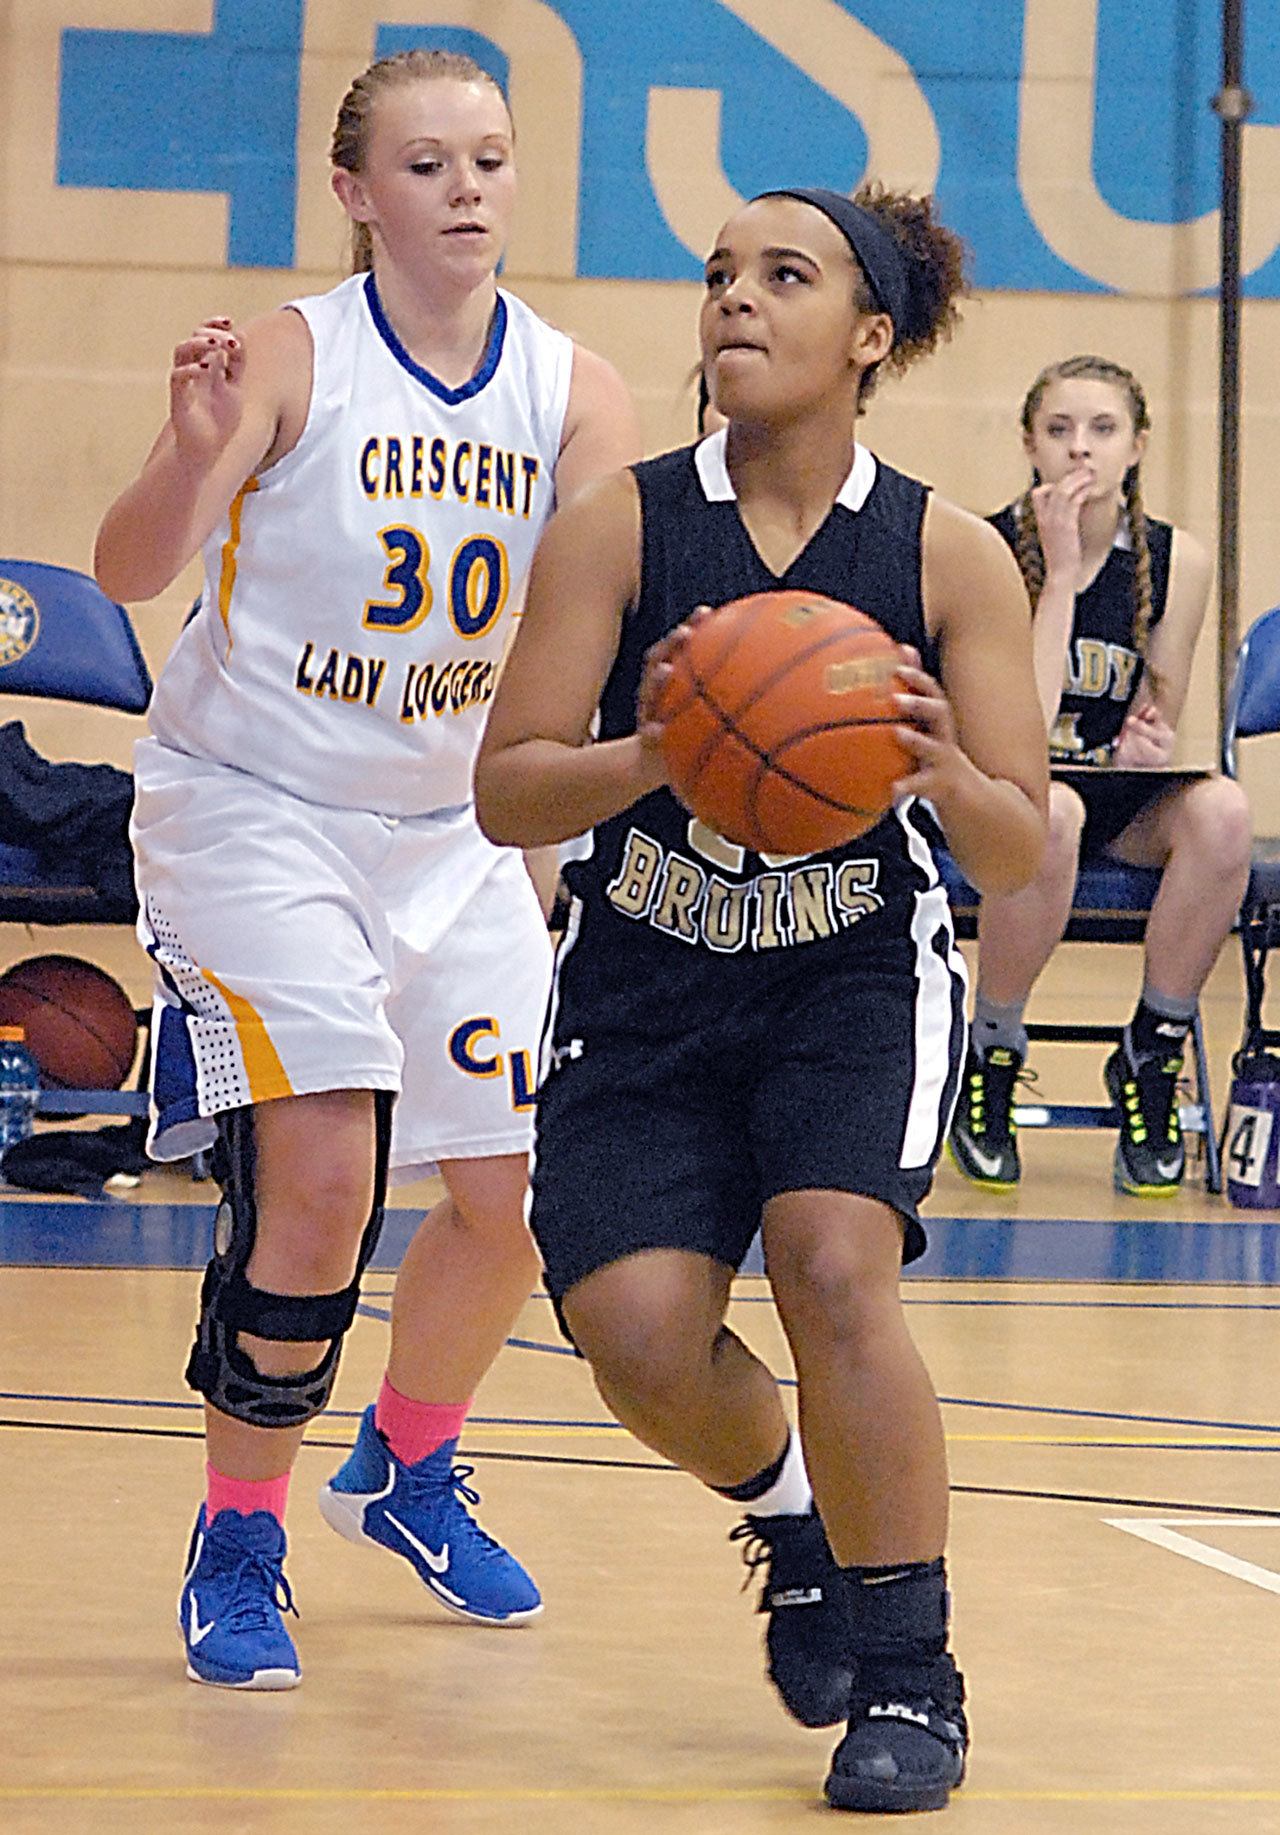 Keith Thorpe/Peninsula Daily News Clallam Bay’s Atokena Abe, right, drives to the lane past Crescent’s Alyssa Hutto in the fourth quarter on Friday night in Joyce.